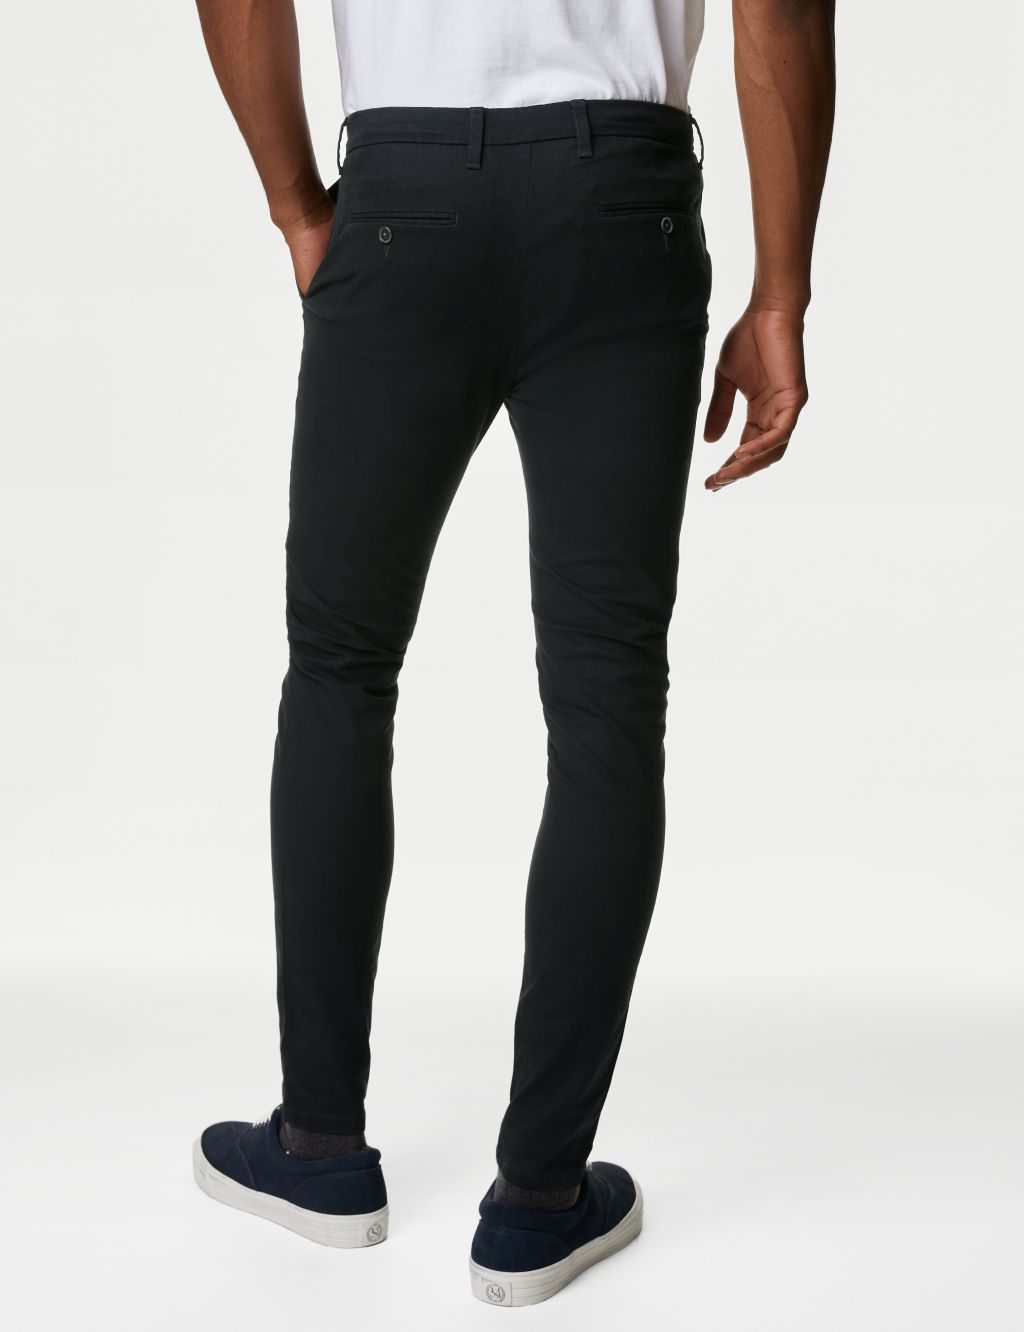 Skinny Fit Stretch Chinos image 5